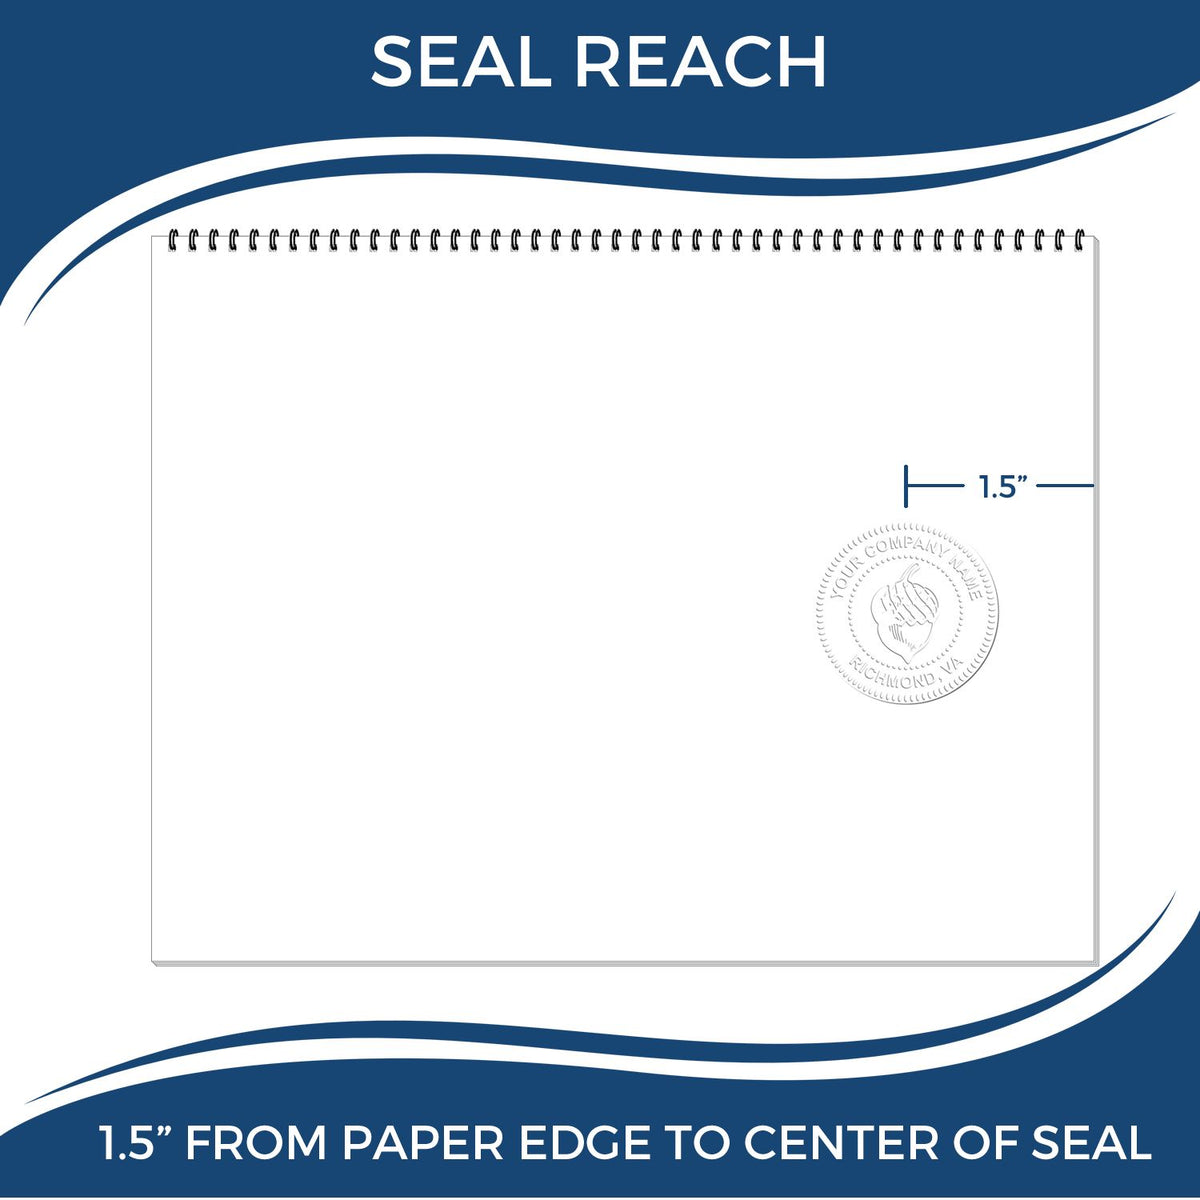 An infographic showing the seal reach which is represented by a ruler and a miniature seal image of the Soft Guam Professional Engineer Seal